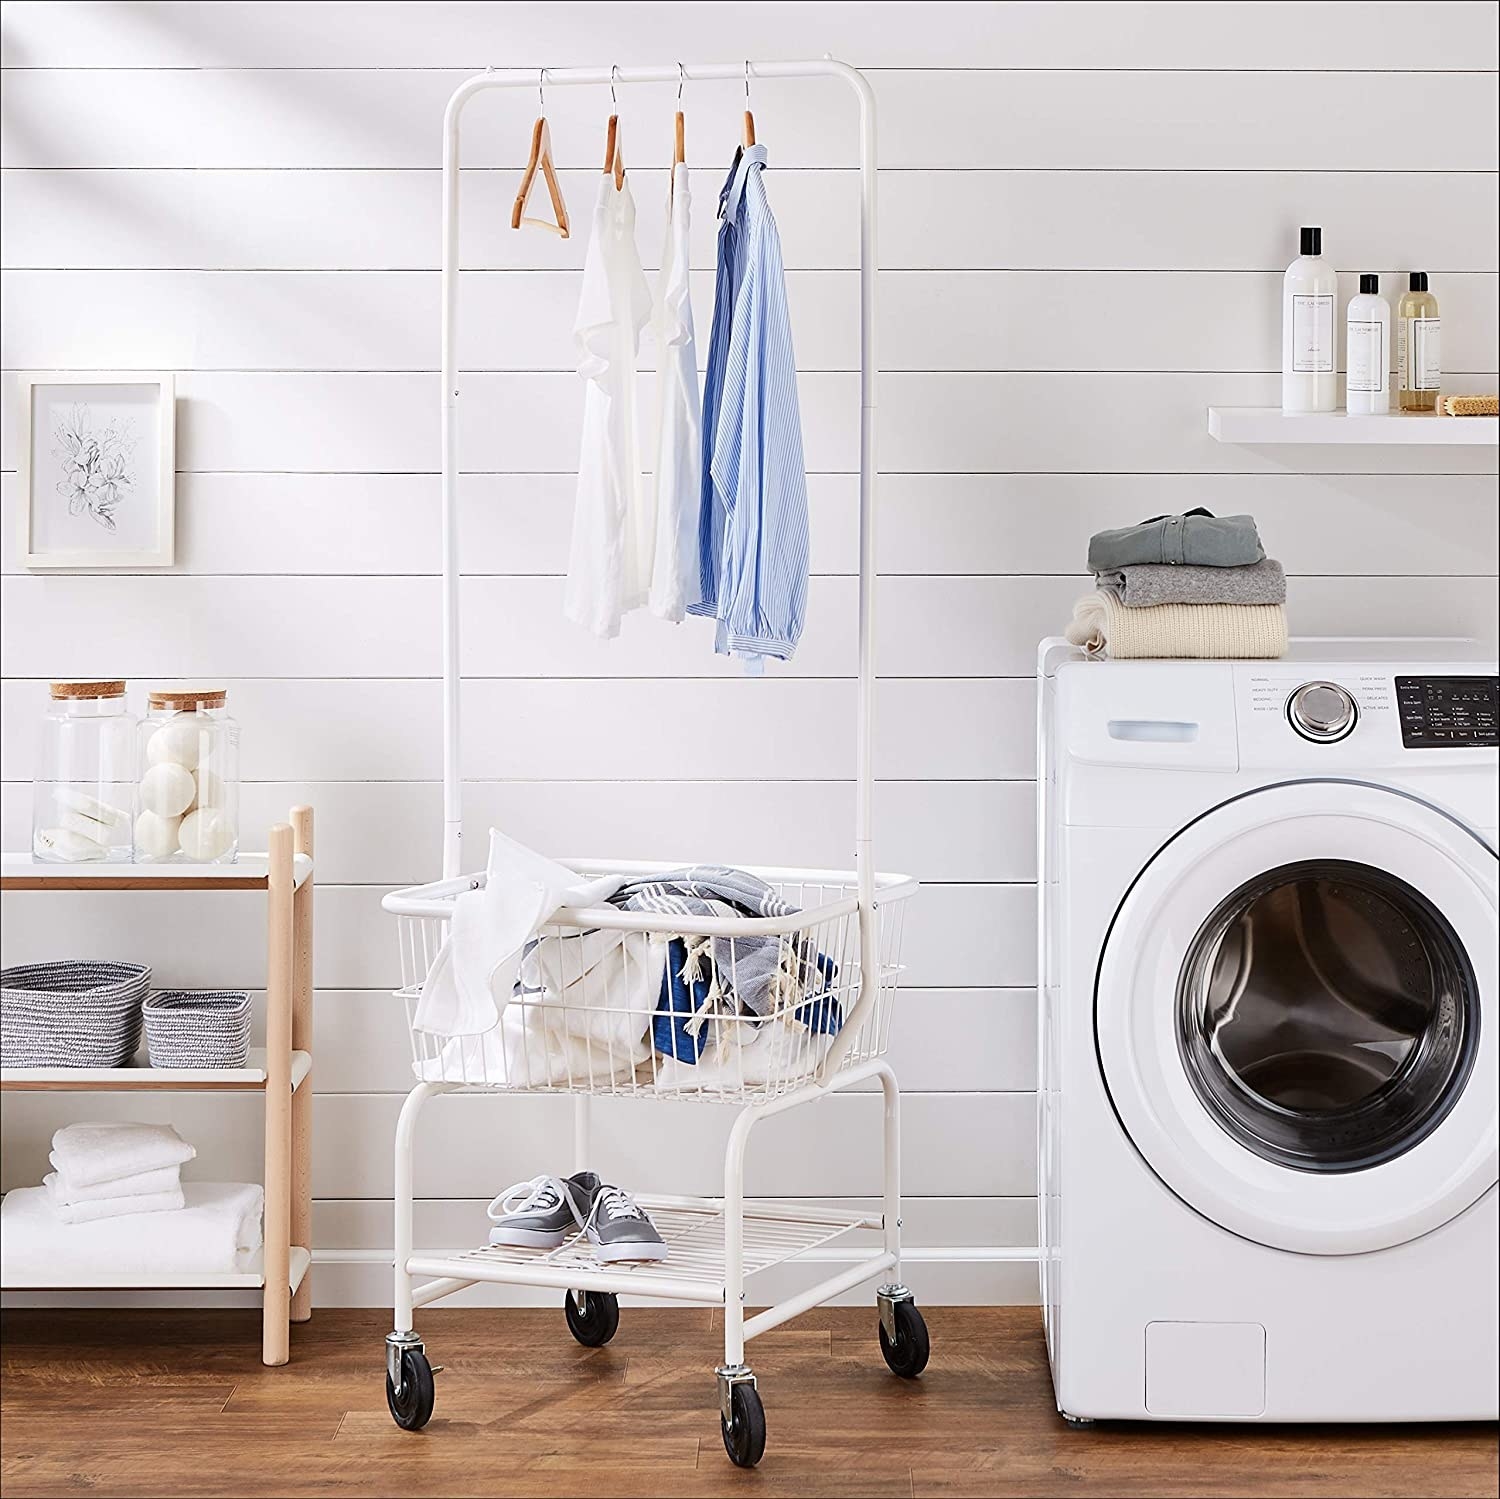 A small square laundry basket with wheels It has a tall hanging rack above it 